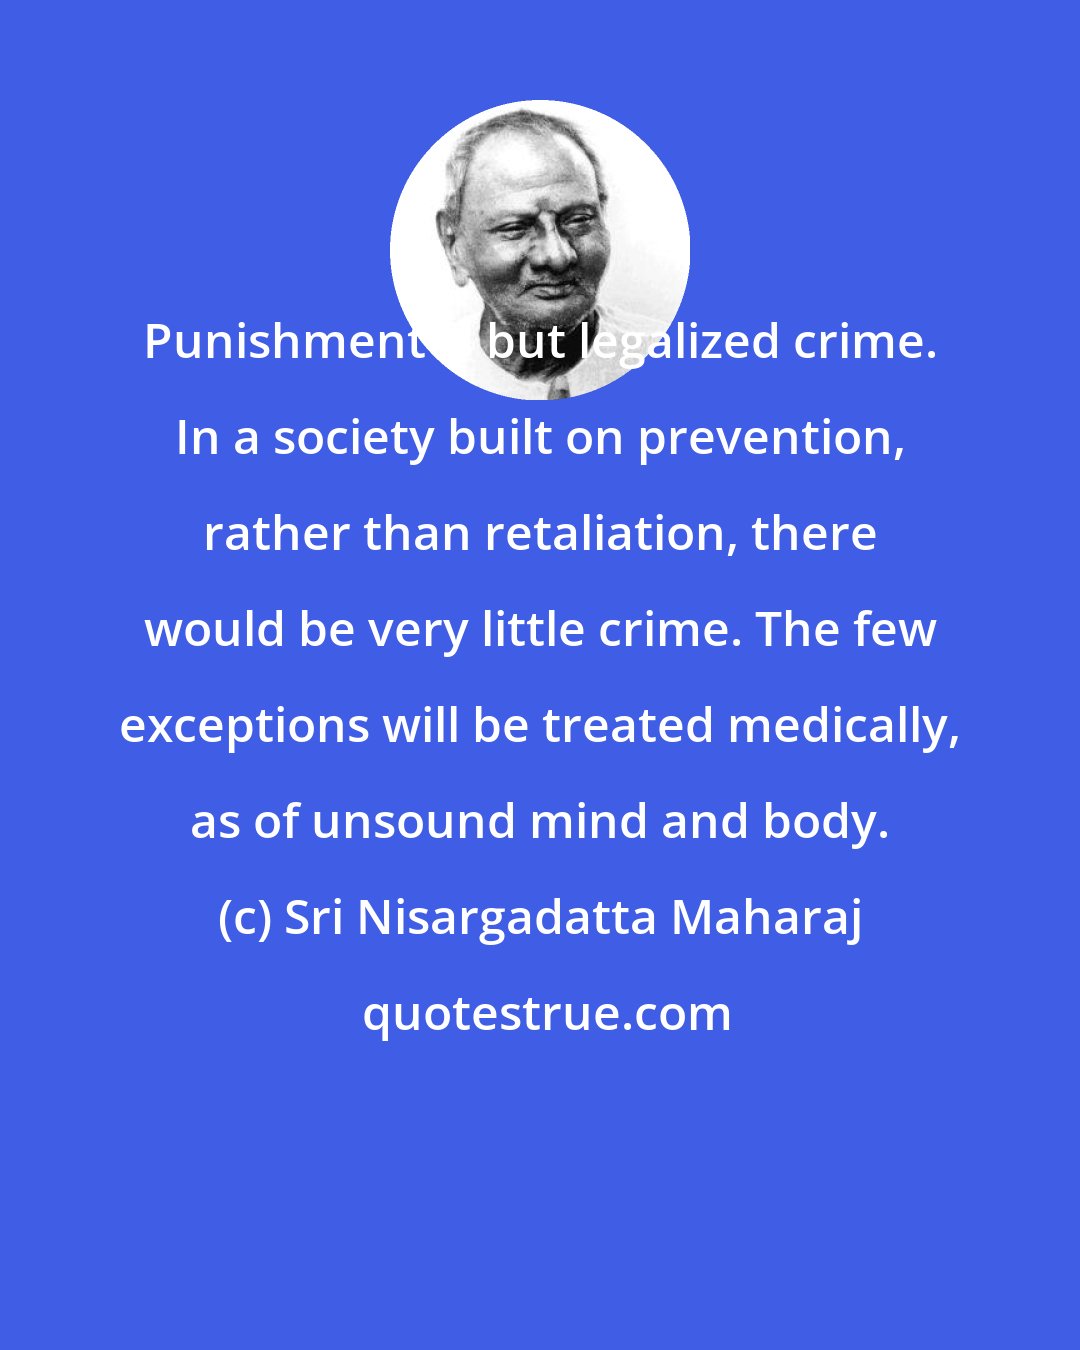 Sri Nisargadatta Maharaj: Punishment is but legalized crime. In a society built on prevention, rather than retaliation, there would be very little crime. The few exceptions will be treated medically, as of unsound mind and body.